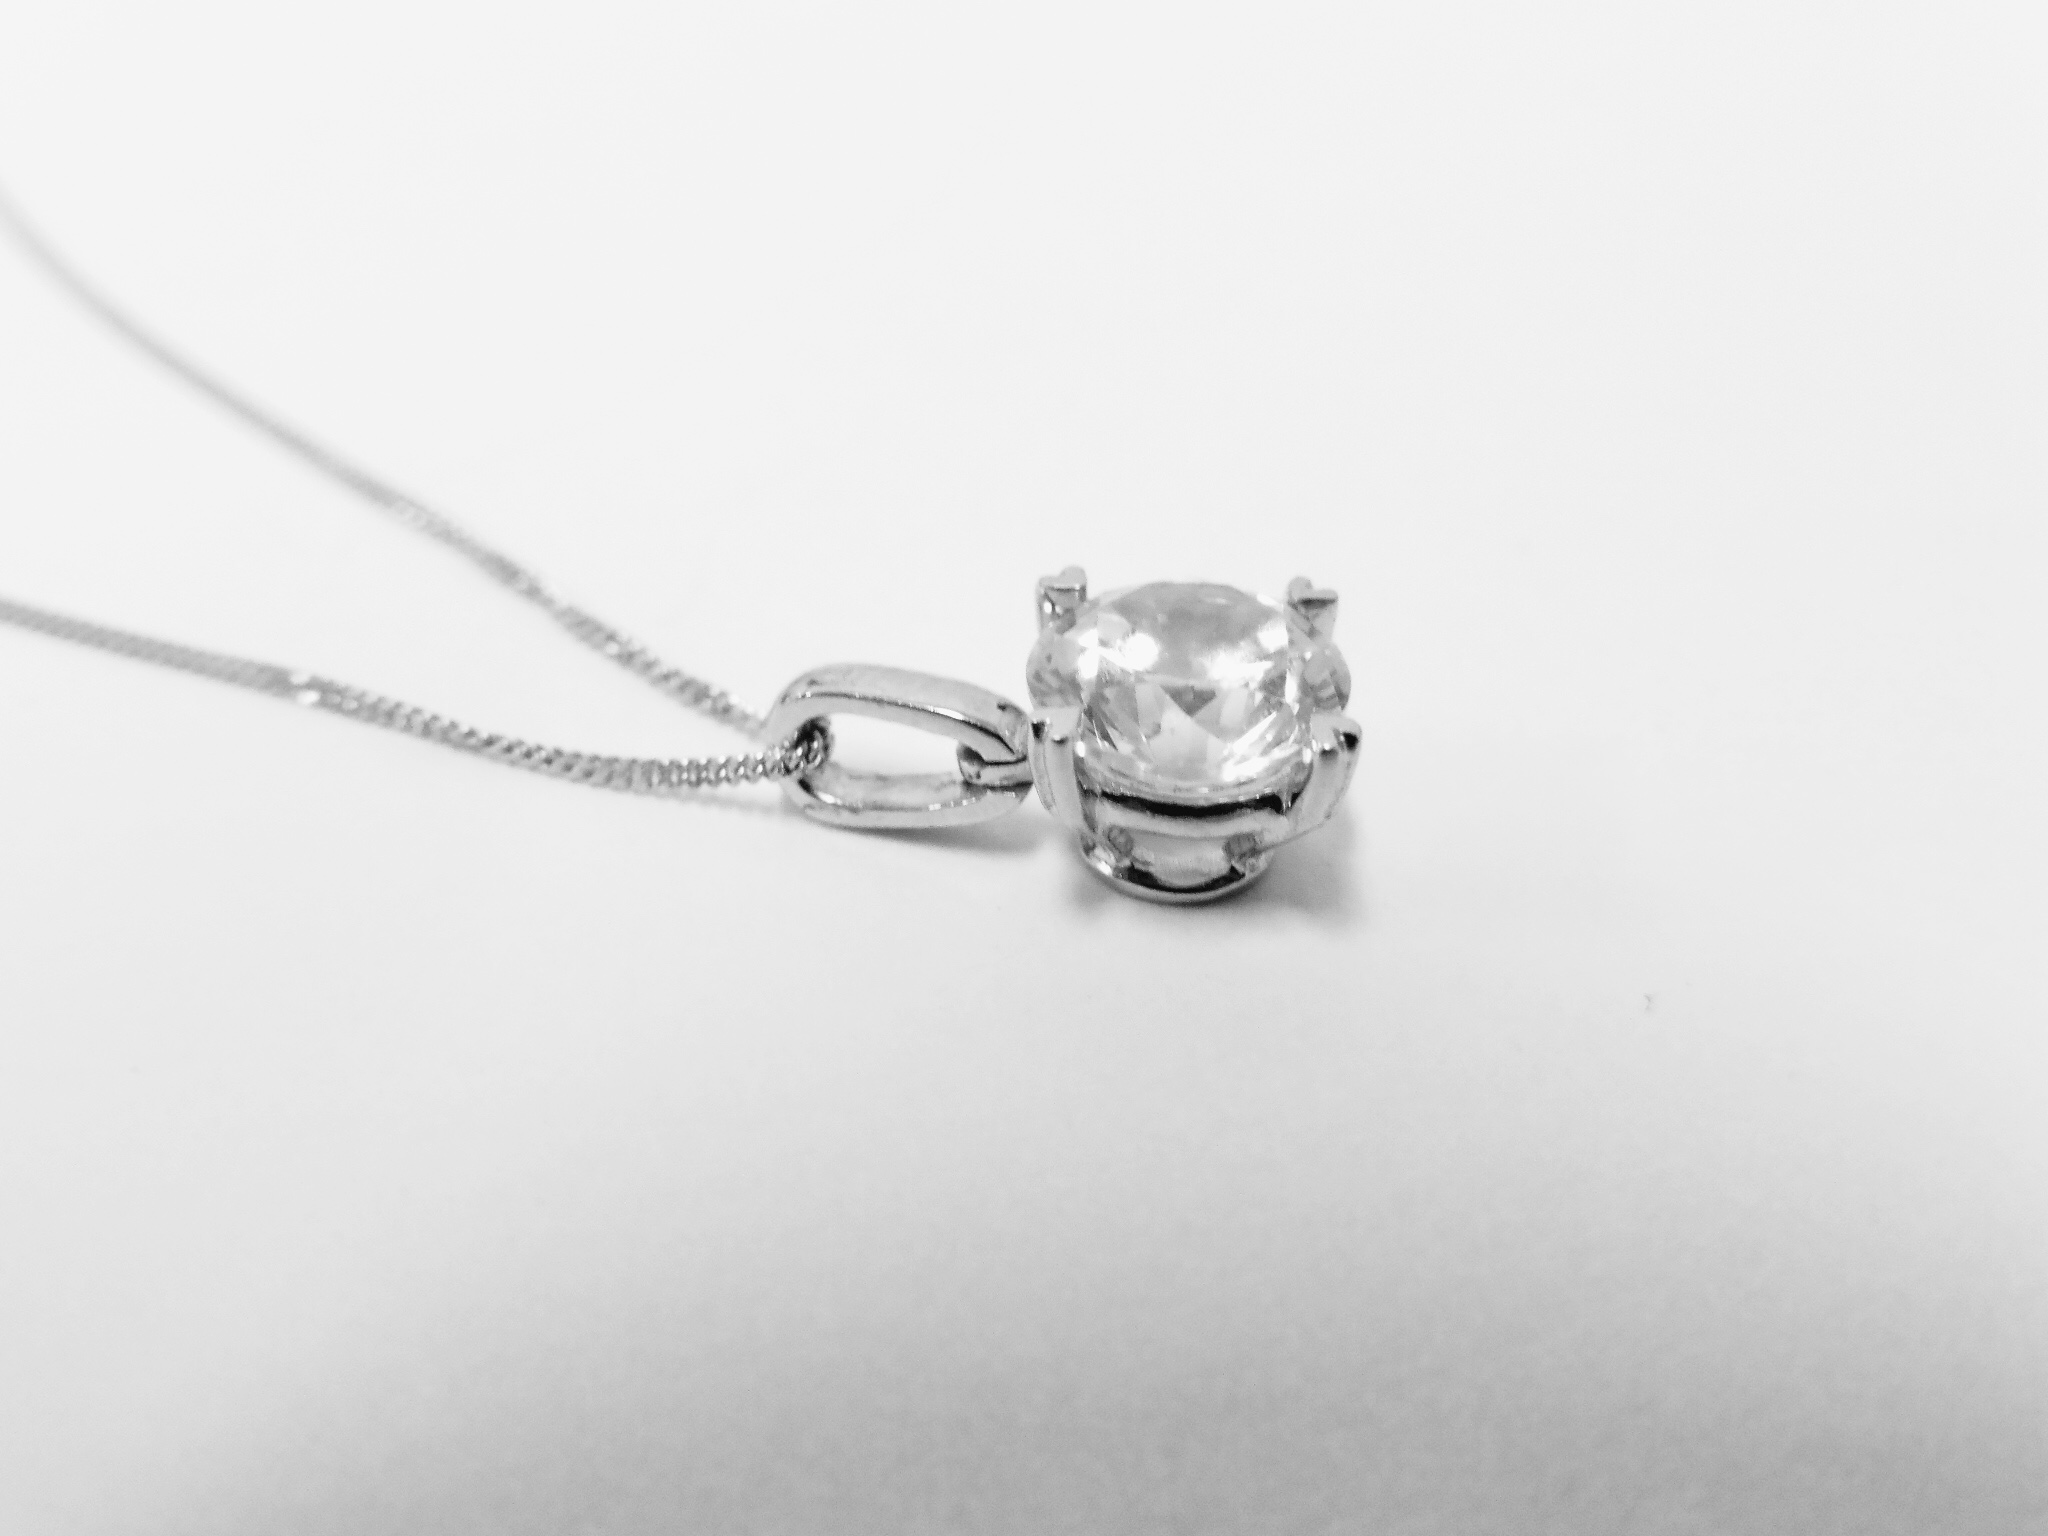 1.00ct diamond solitaire style pendant. Brilliant cut diamond, H colour and si3 clarity. Set in a - Image 2 of 4